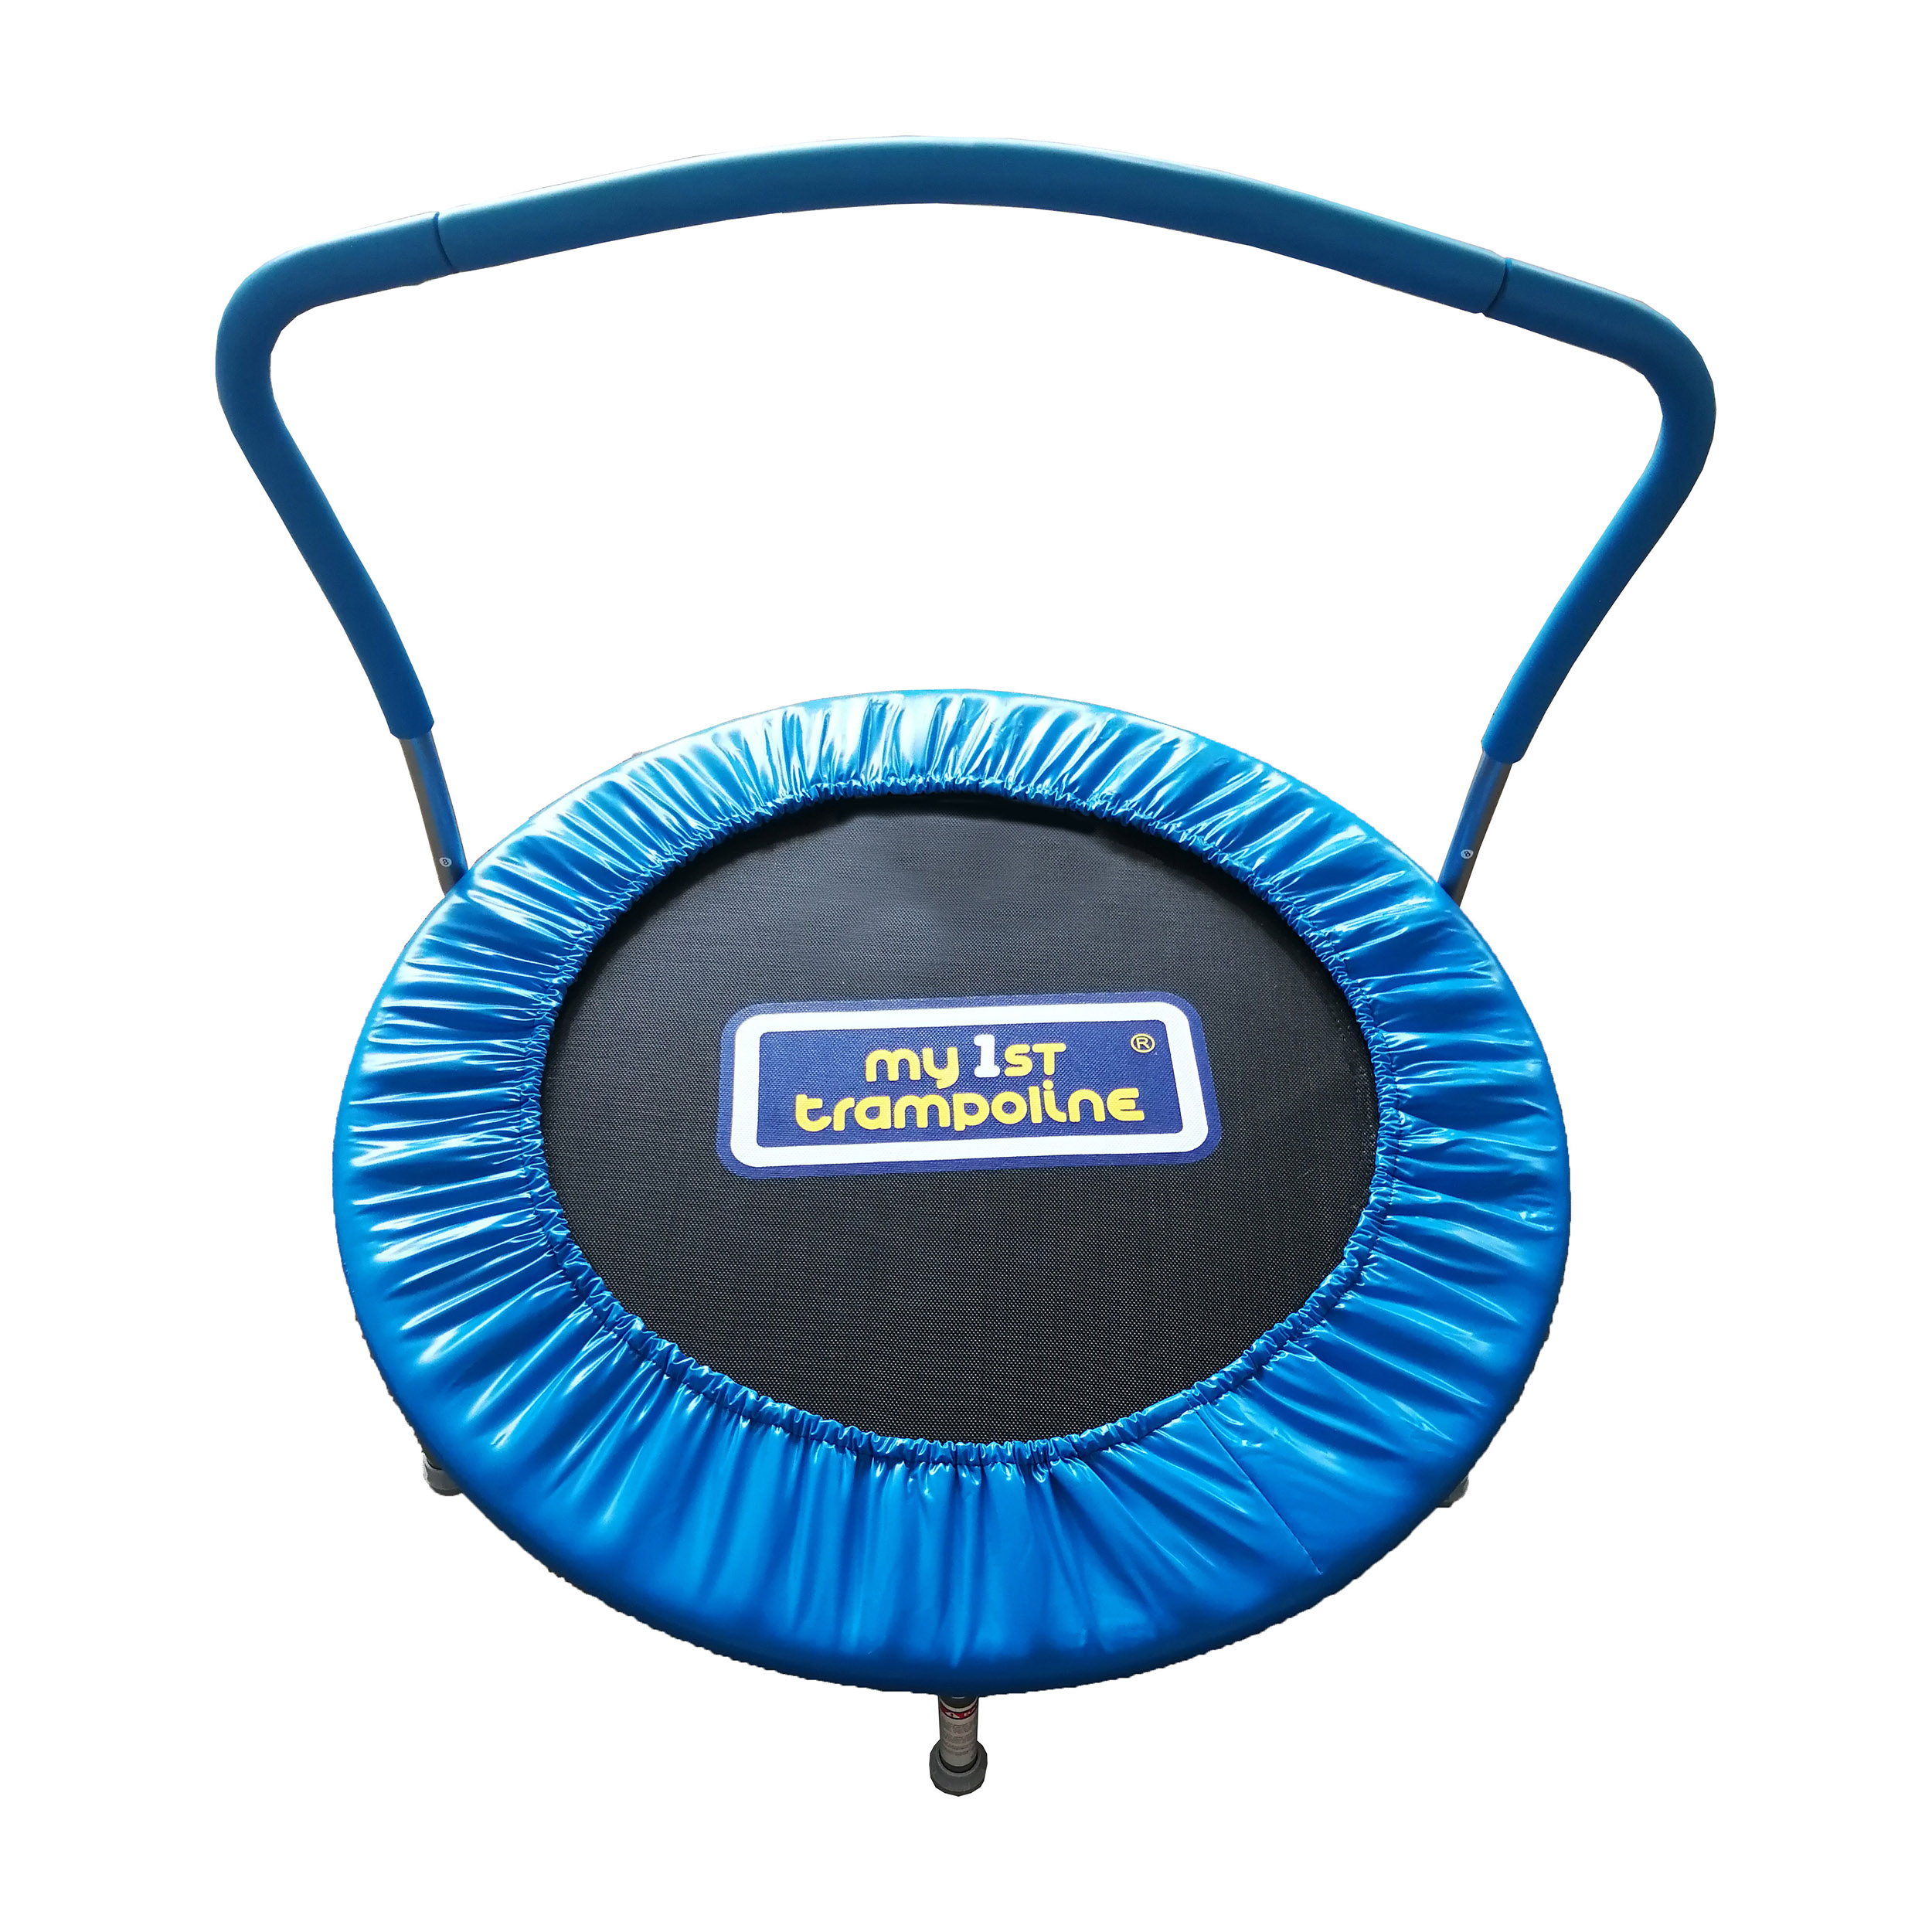 36" My 1st Trampoline with Handlebar, Blue - image 1 of 8